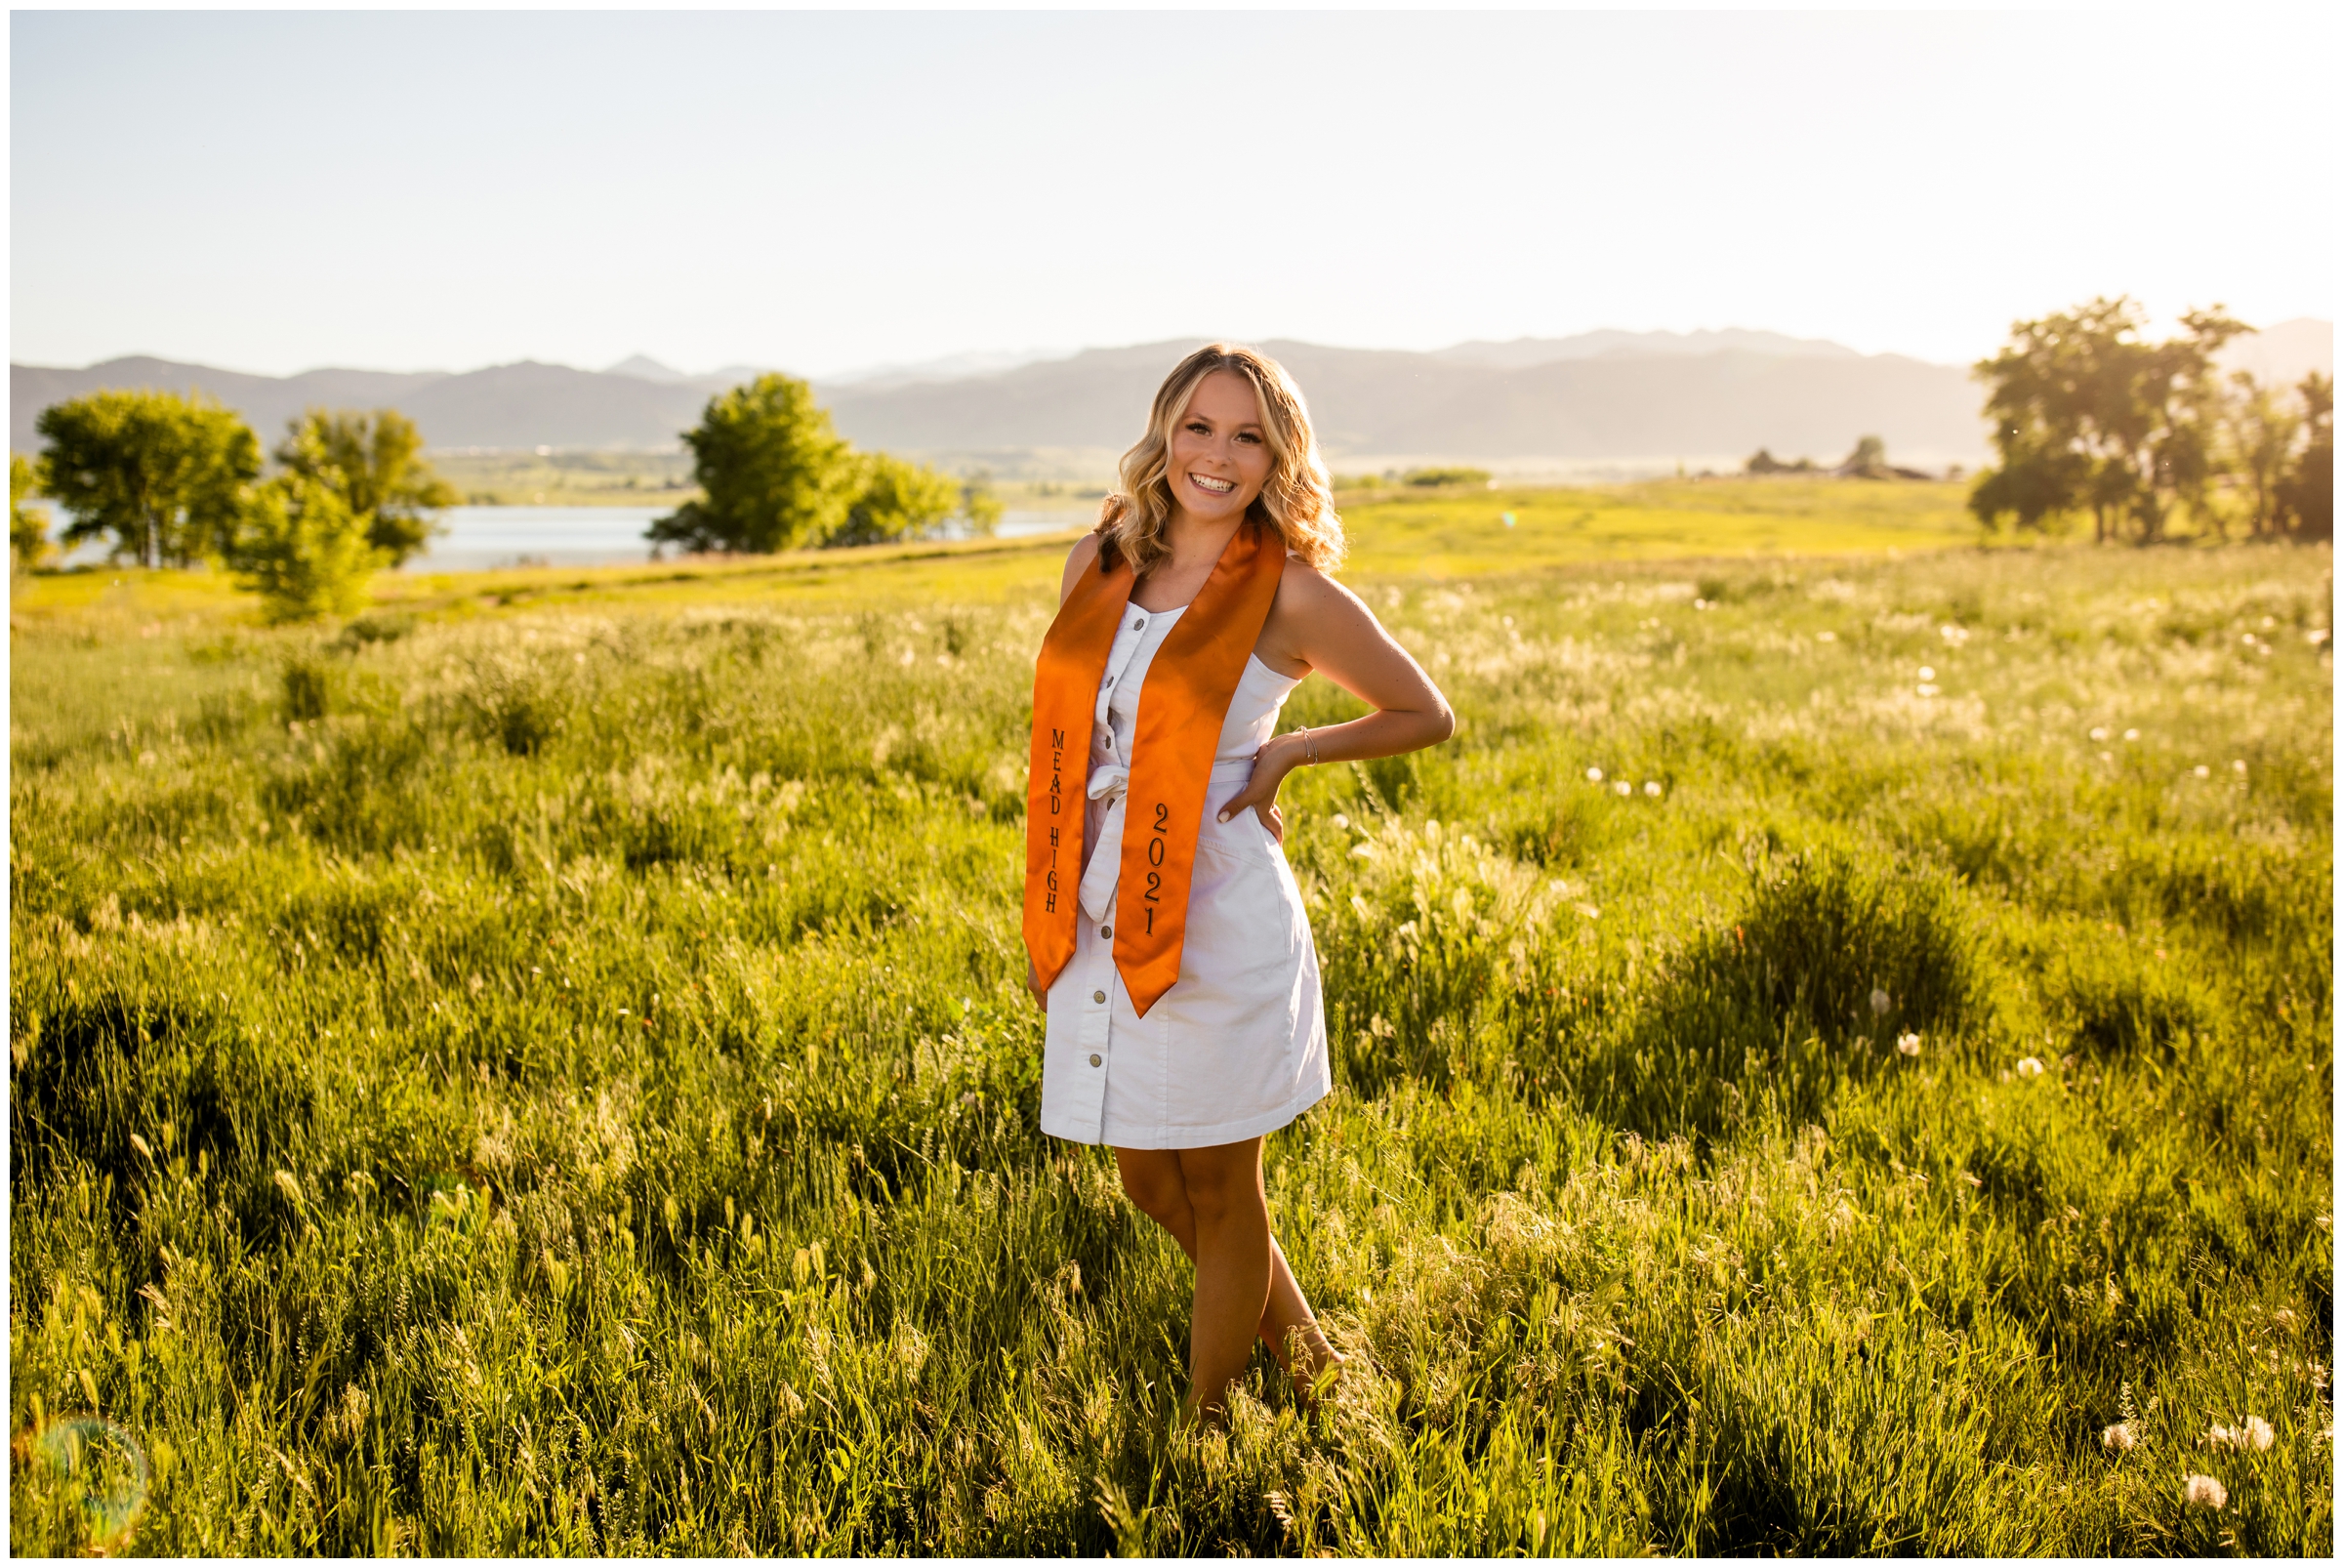 Colorado graduation pictures at Coot Lake by Longmont photographer Plum Pretty Photography